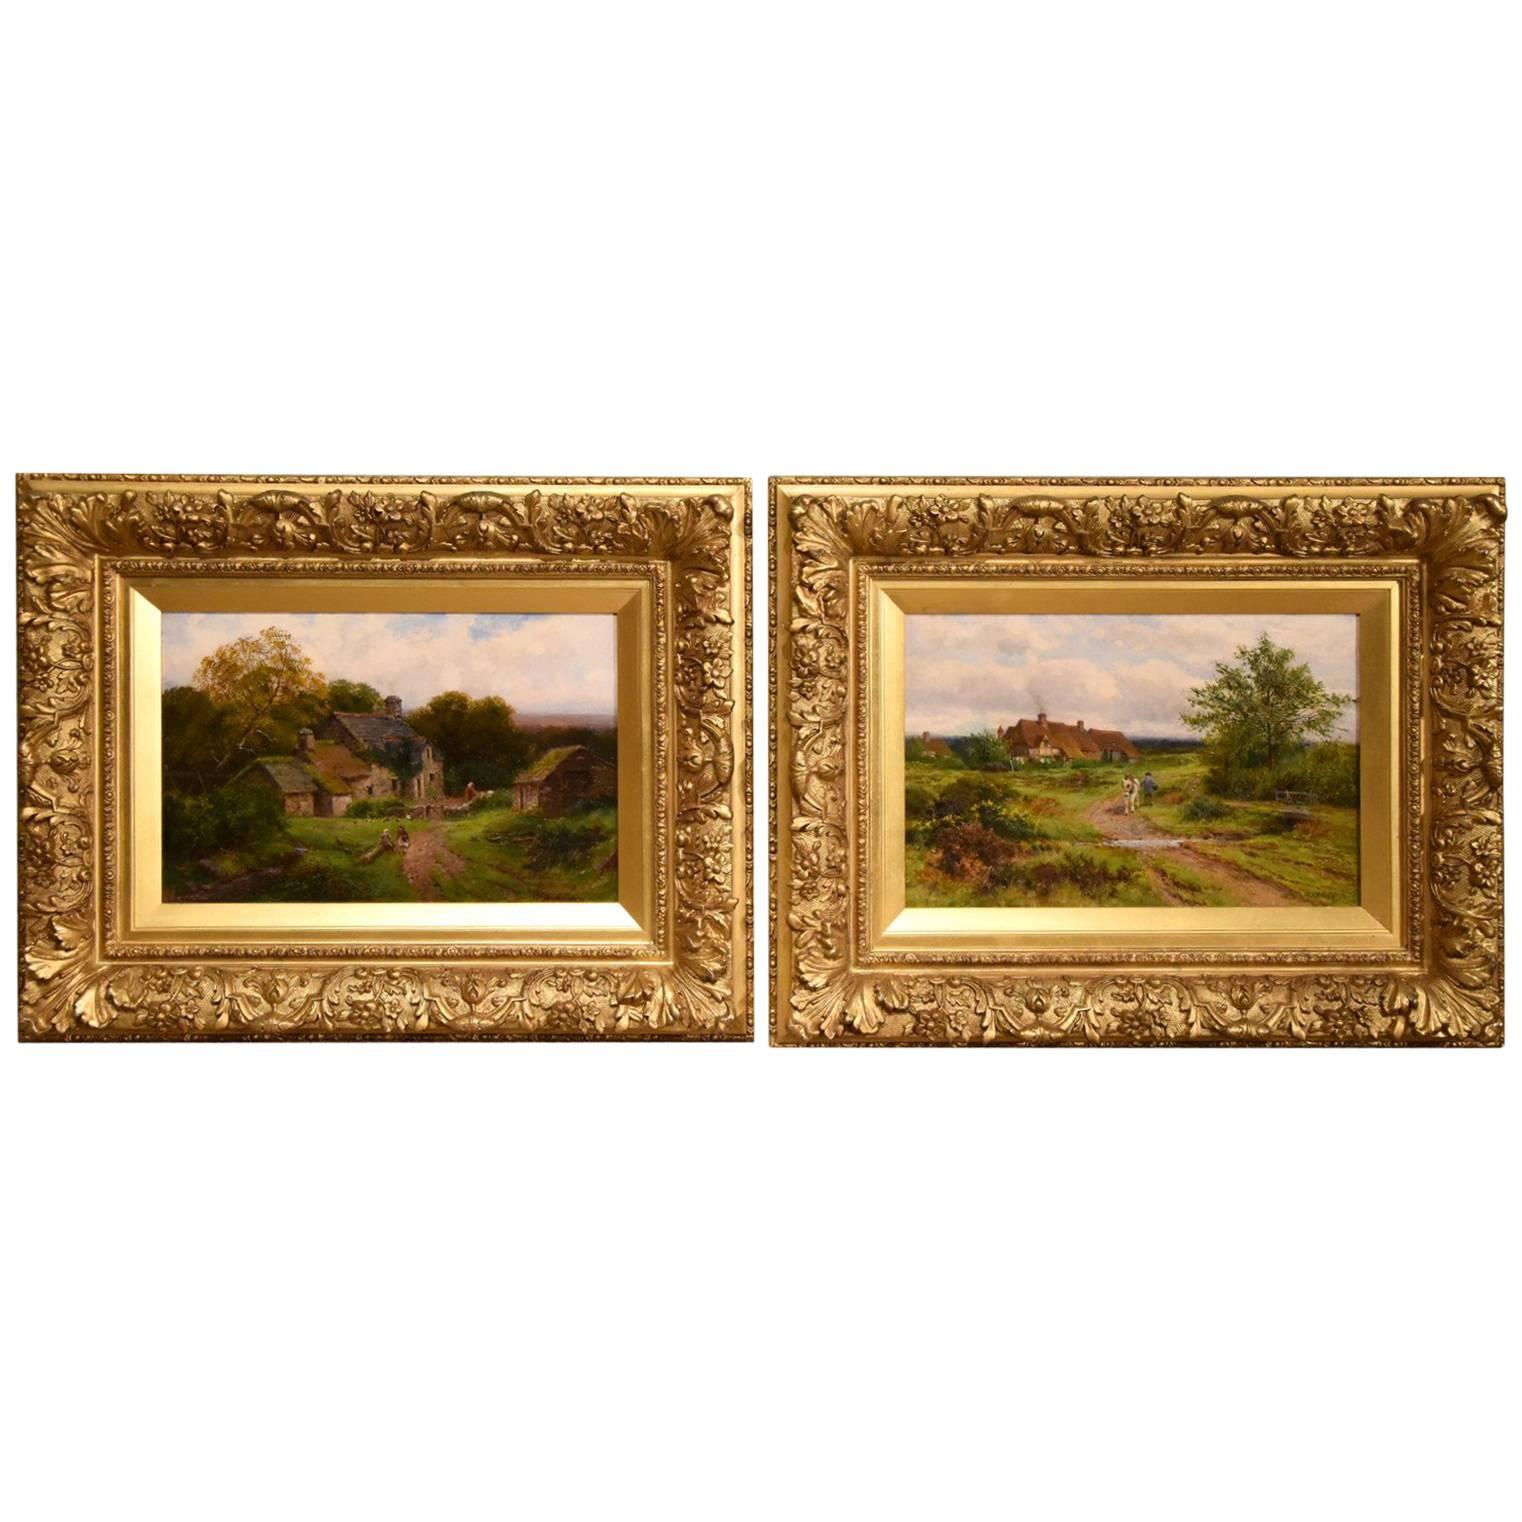 "Welsh Homestead" and "Springtime" by William Elleby